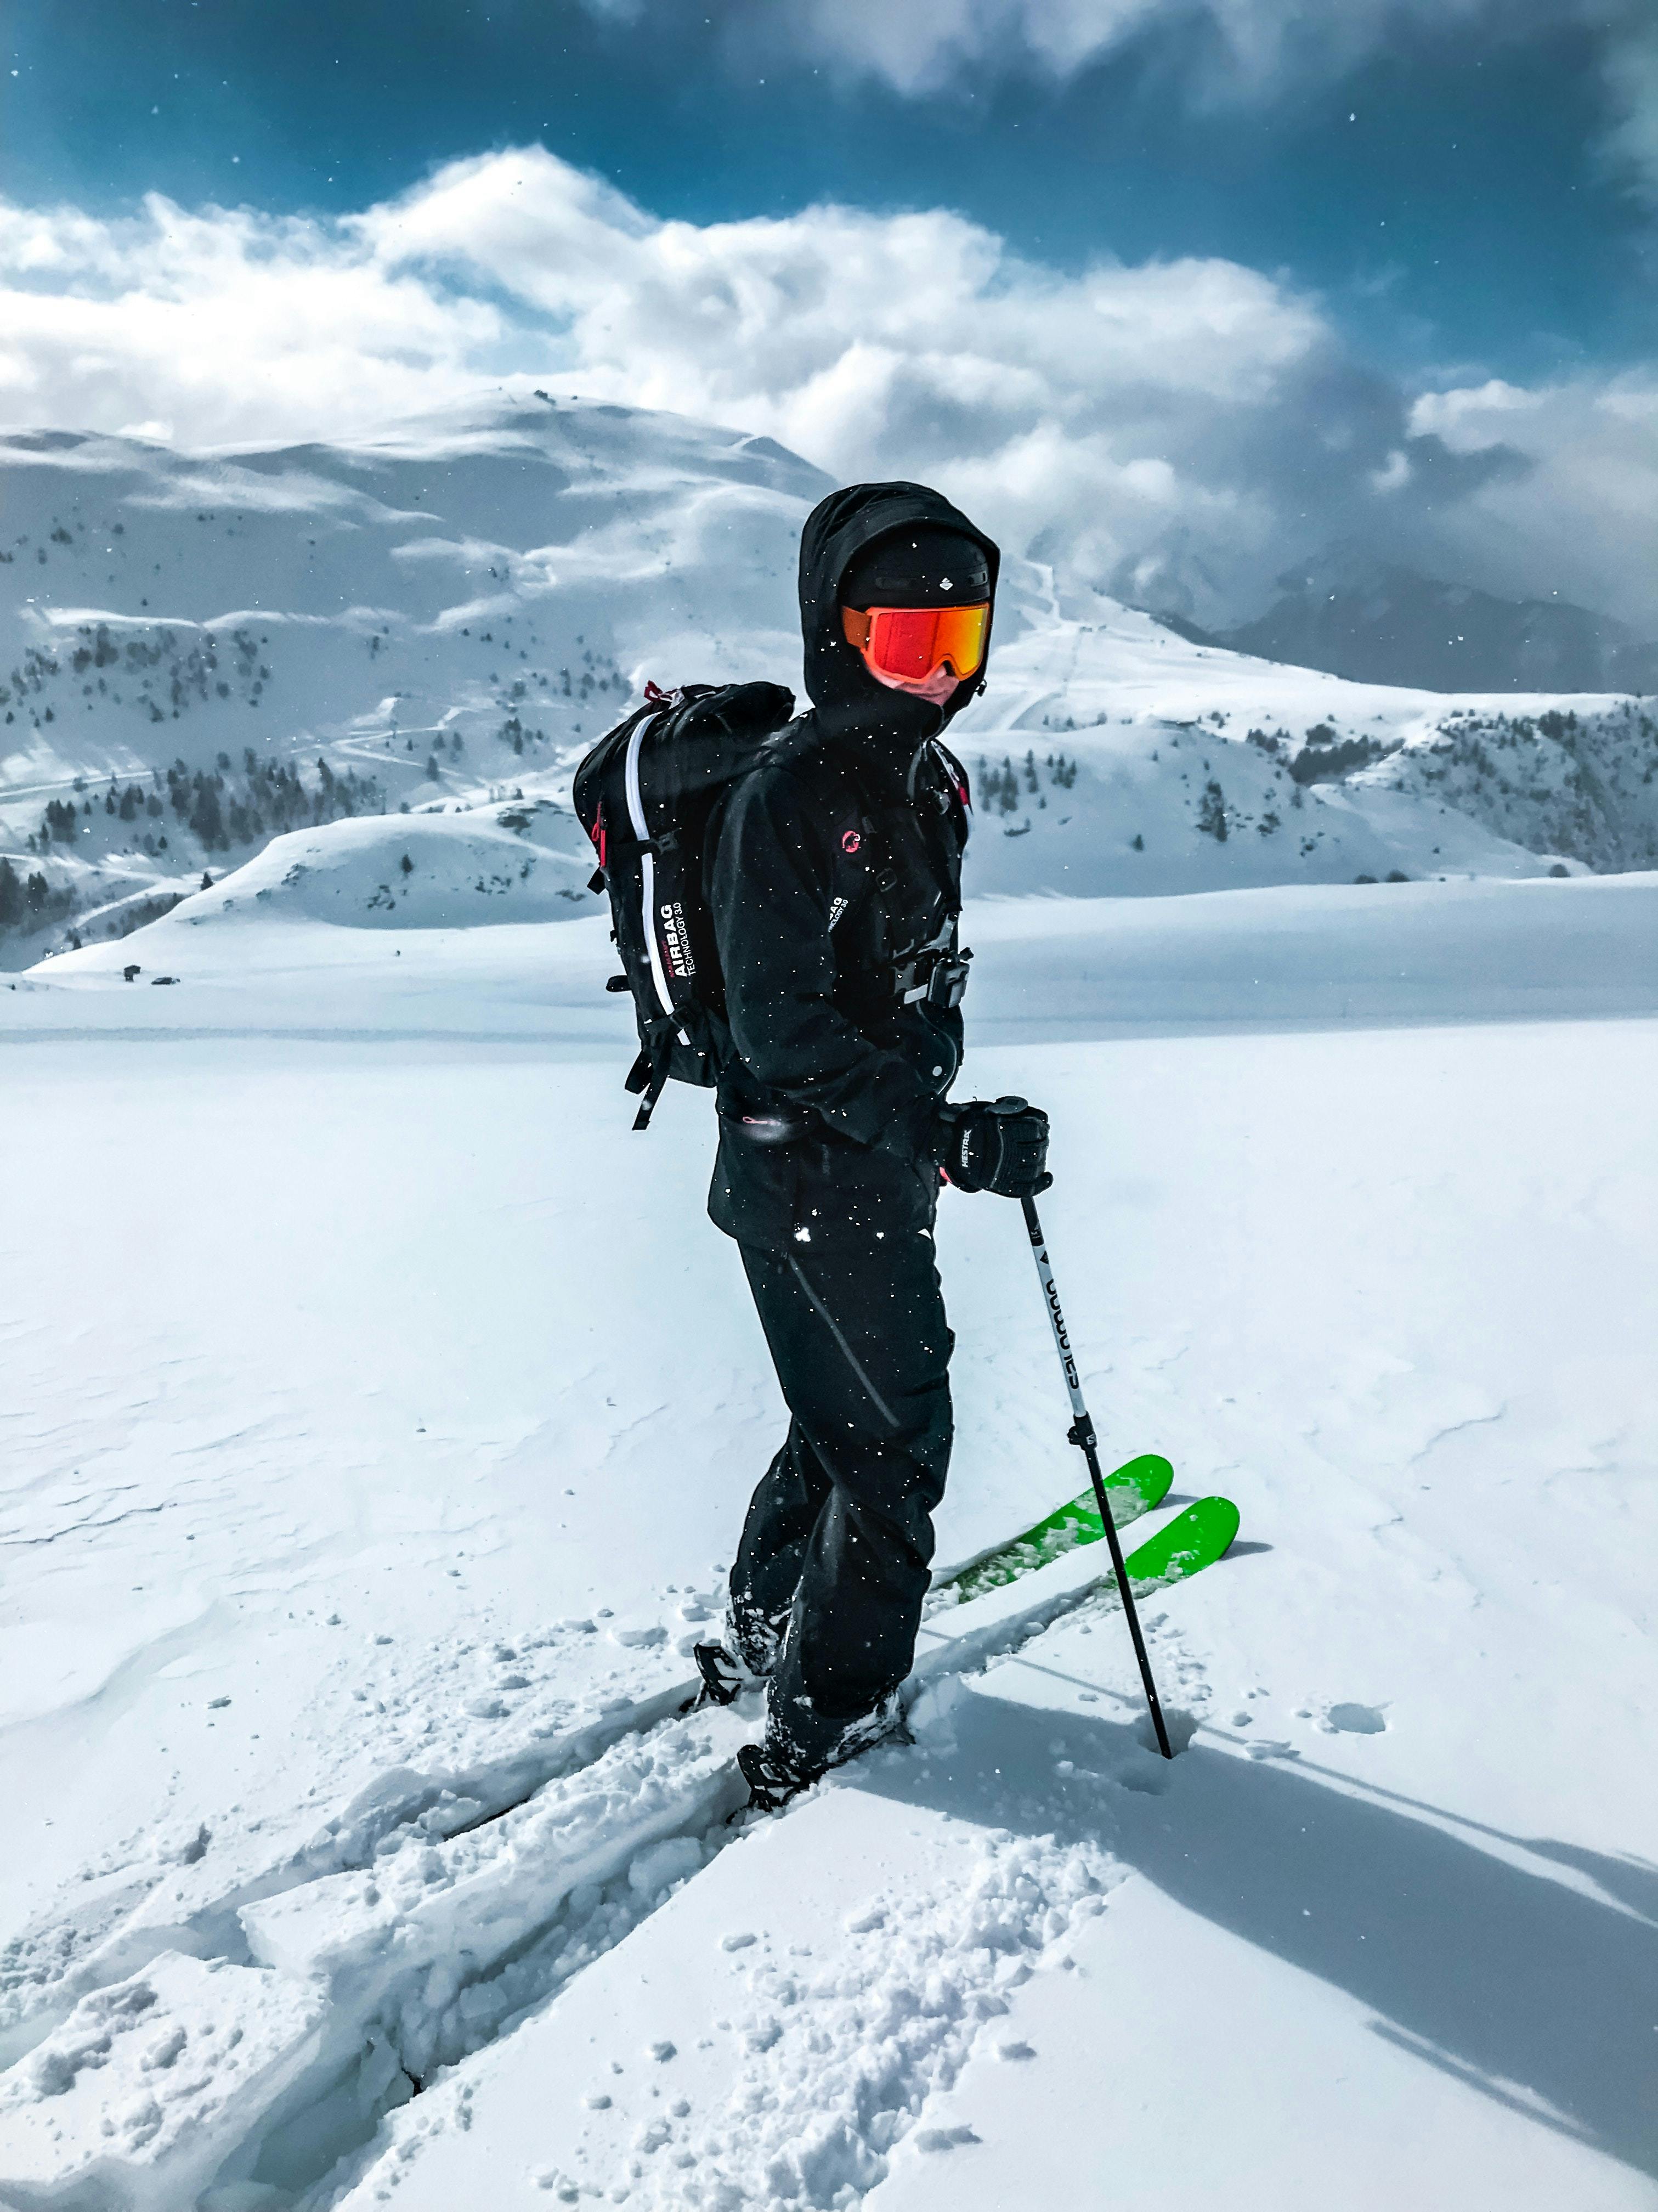 A skier in all black turns to look at the camera over their shoulder